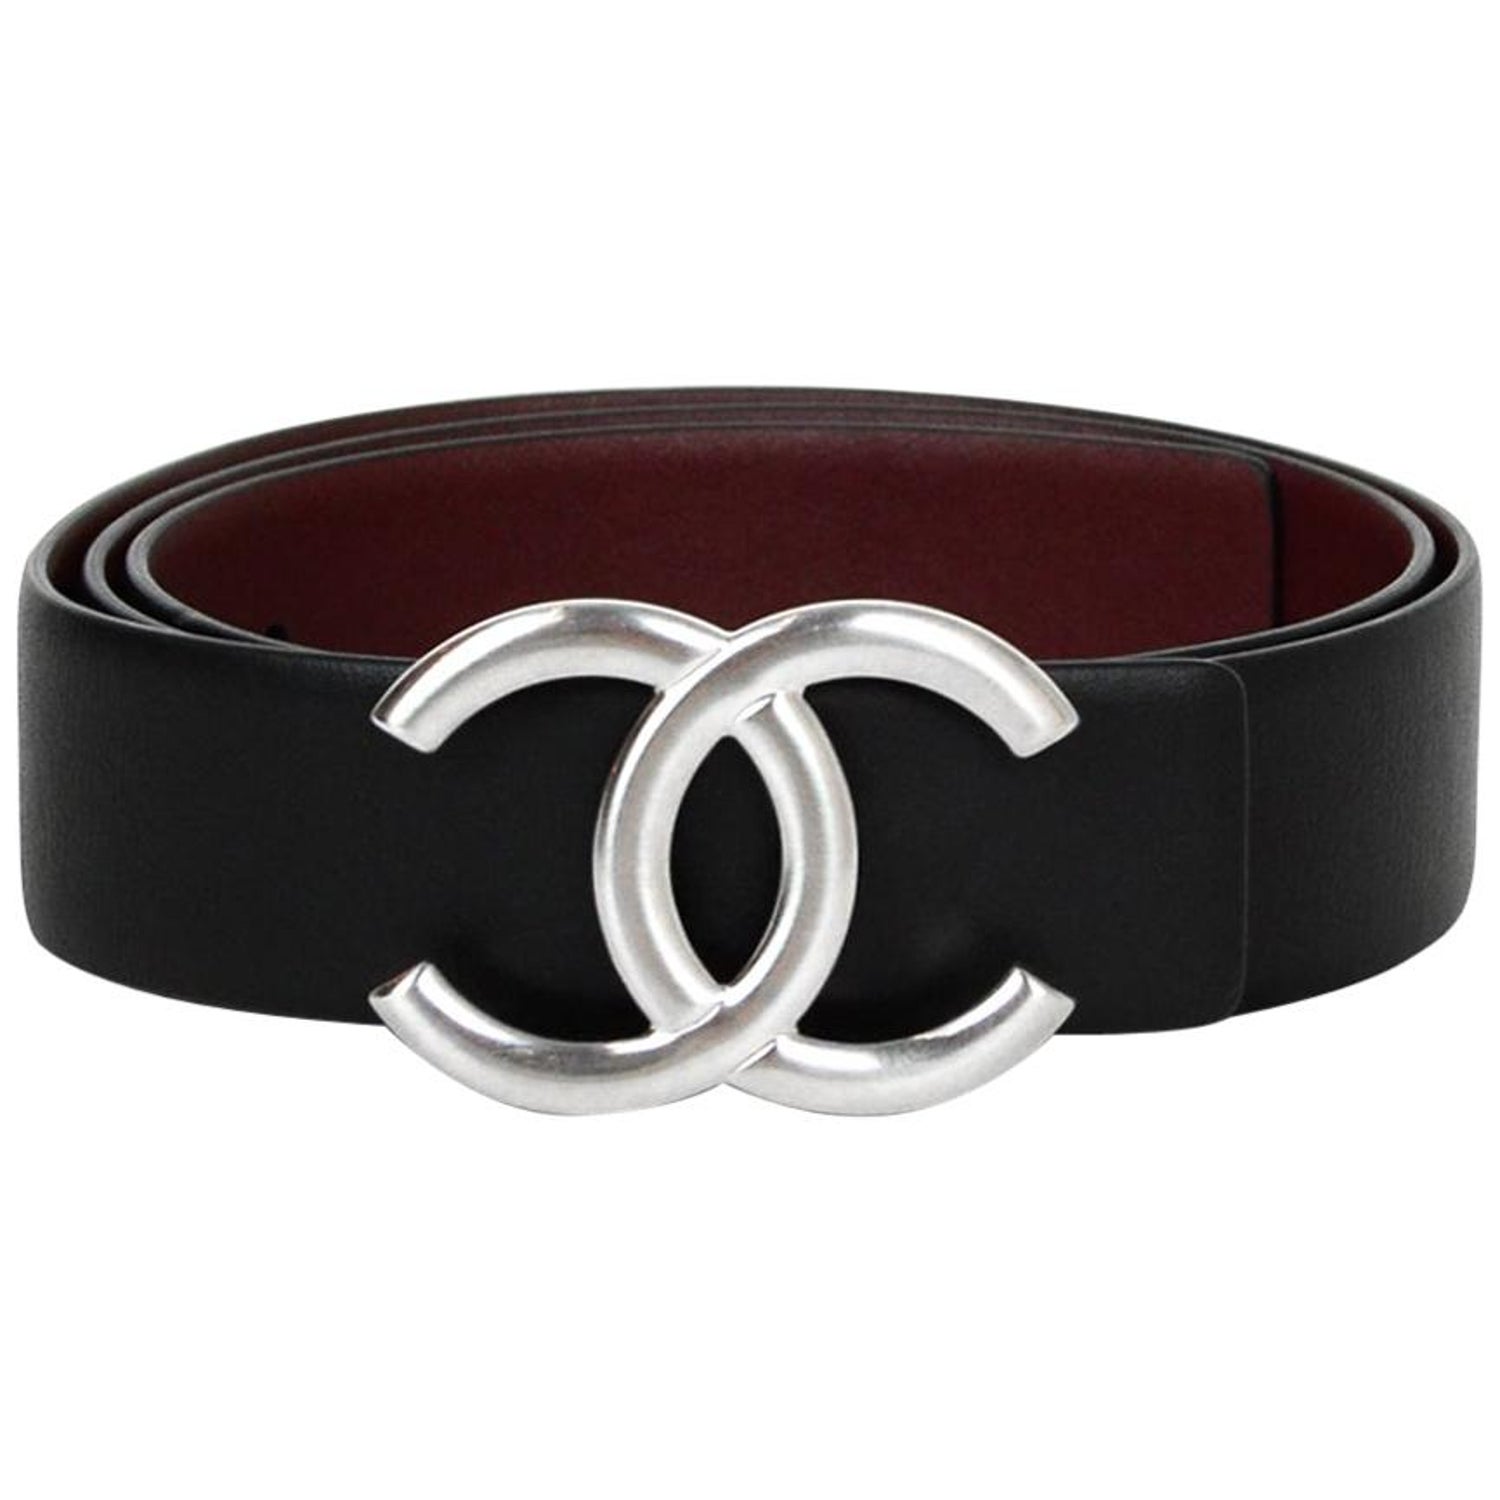 Chanel Reversible Belt, White and Black with Silver Hardware, Size 75,  Preowned in Dustbag WA001